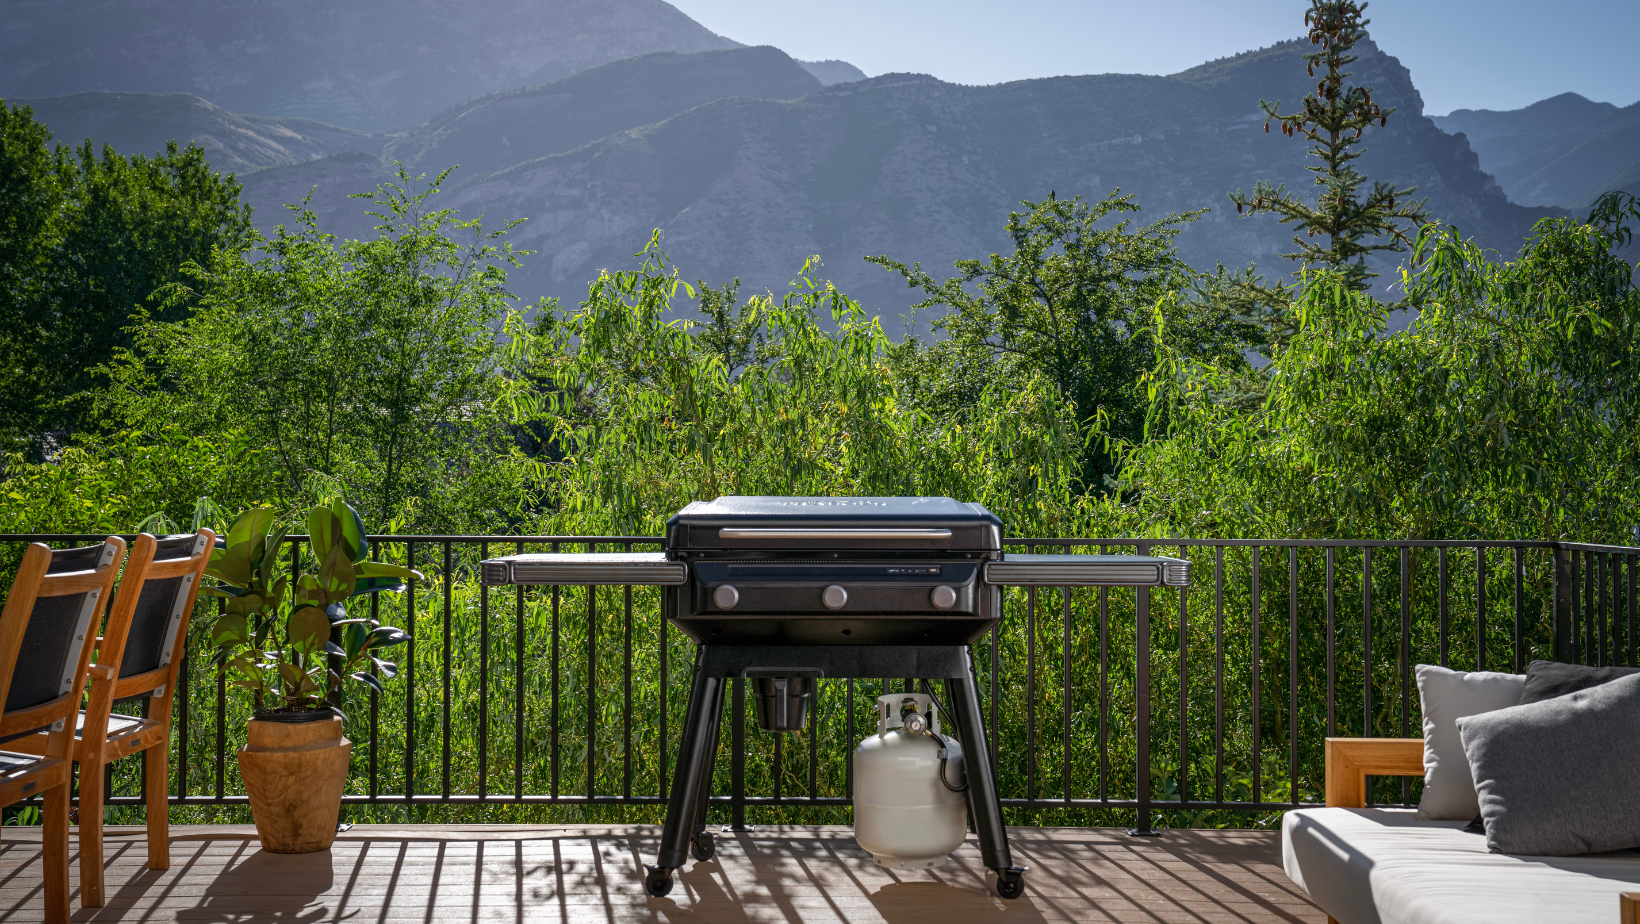 The Traeger Flatrock Griddle on a patio with beautiful mountains in the background.